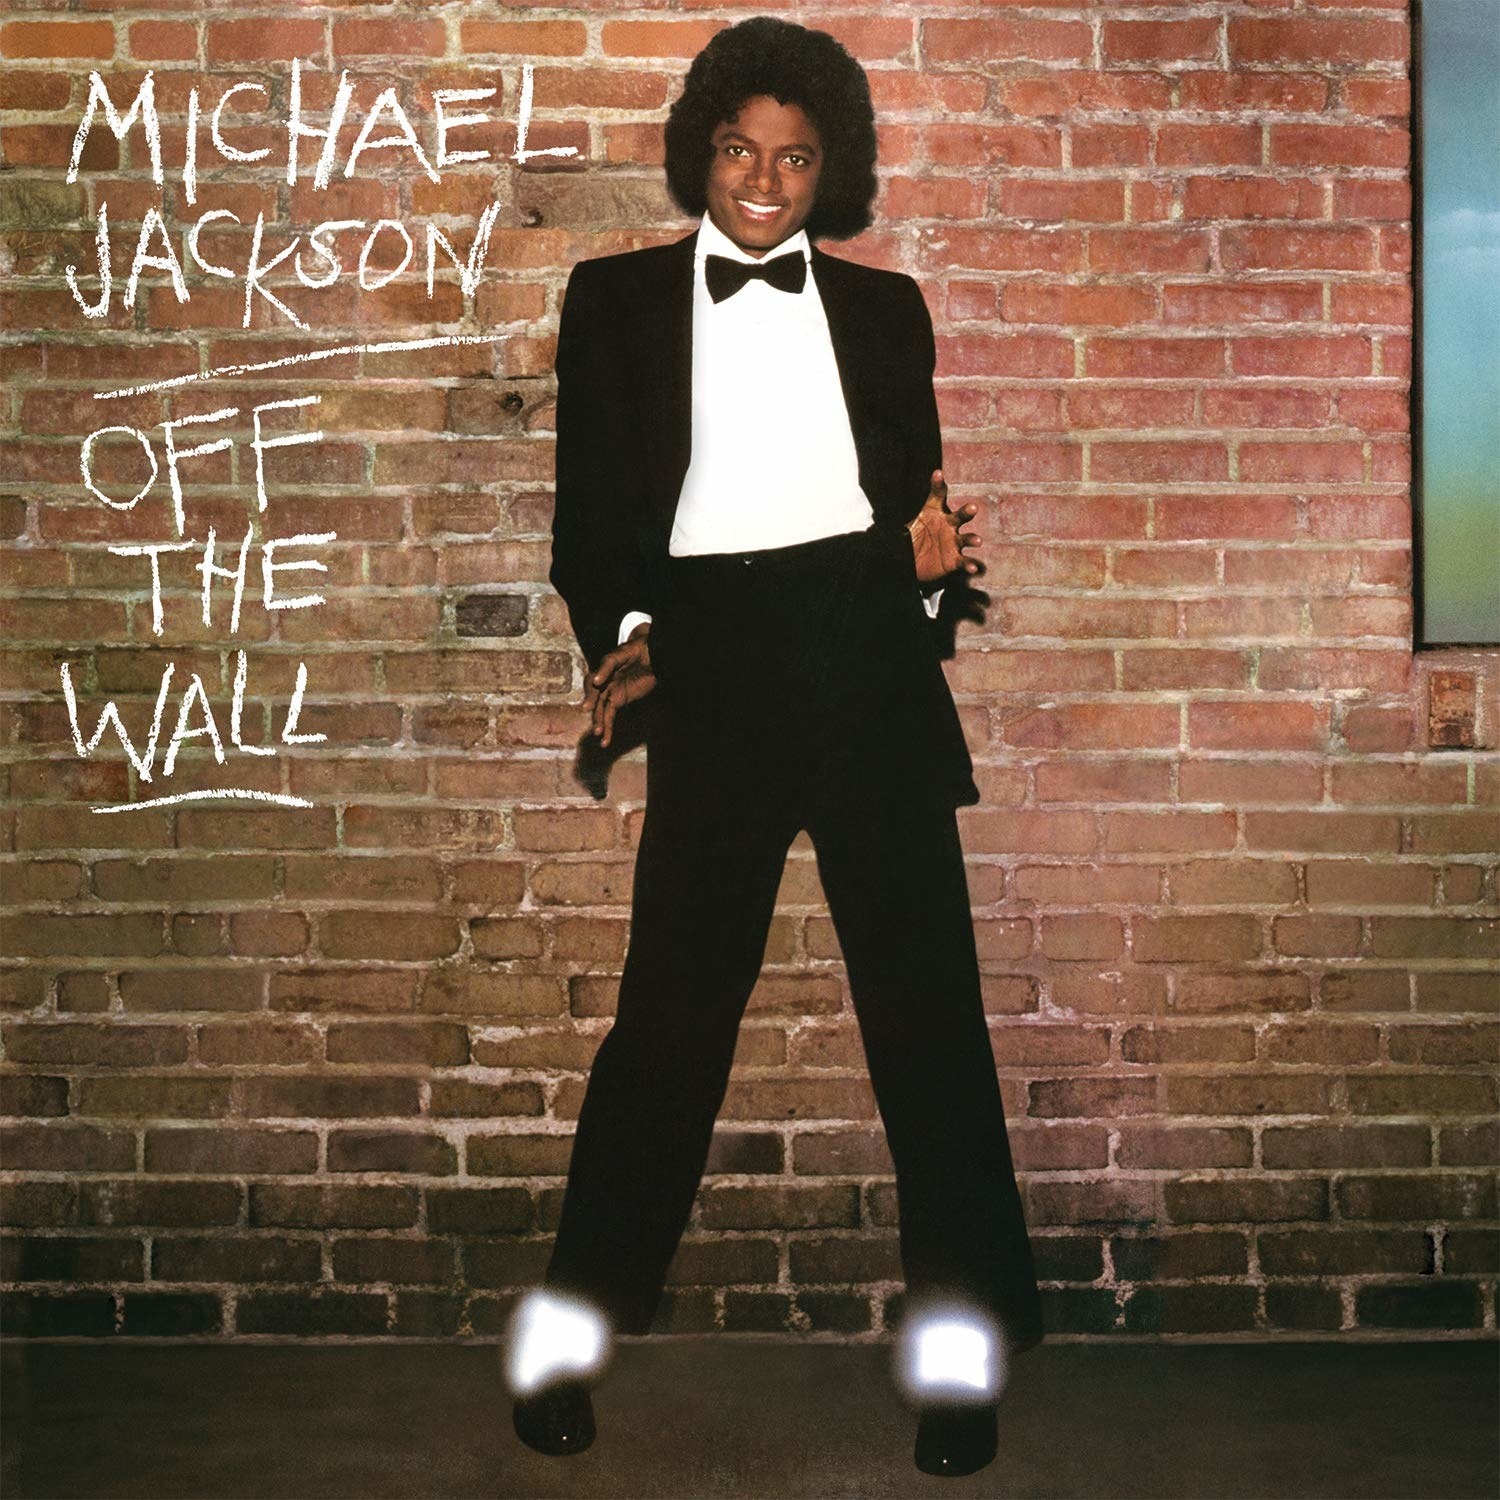 Michael Jackson in a tux against a brick wall cover of Off The Wall